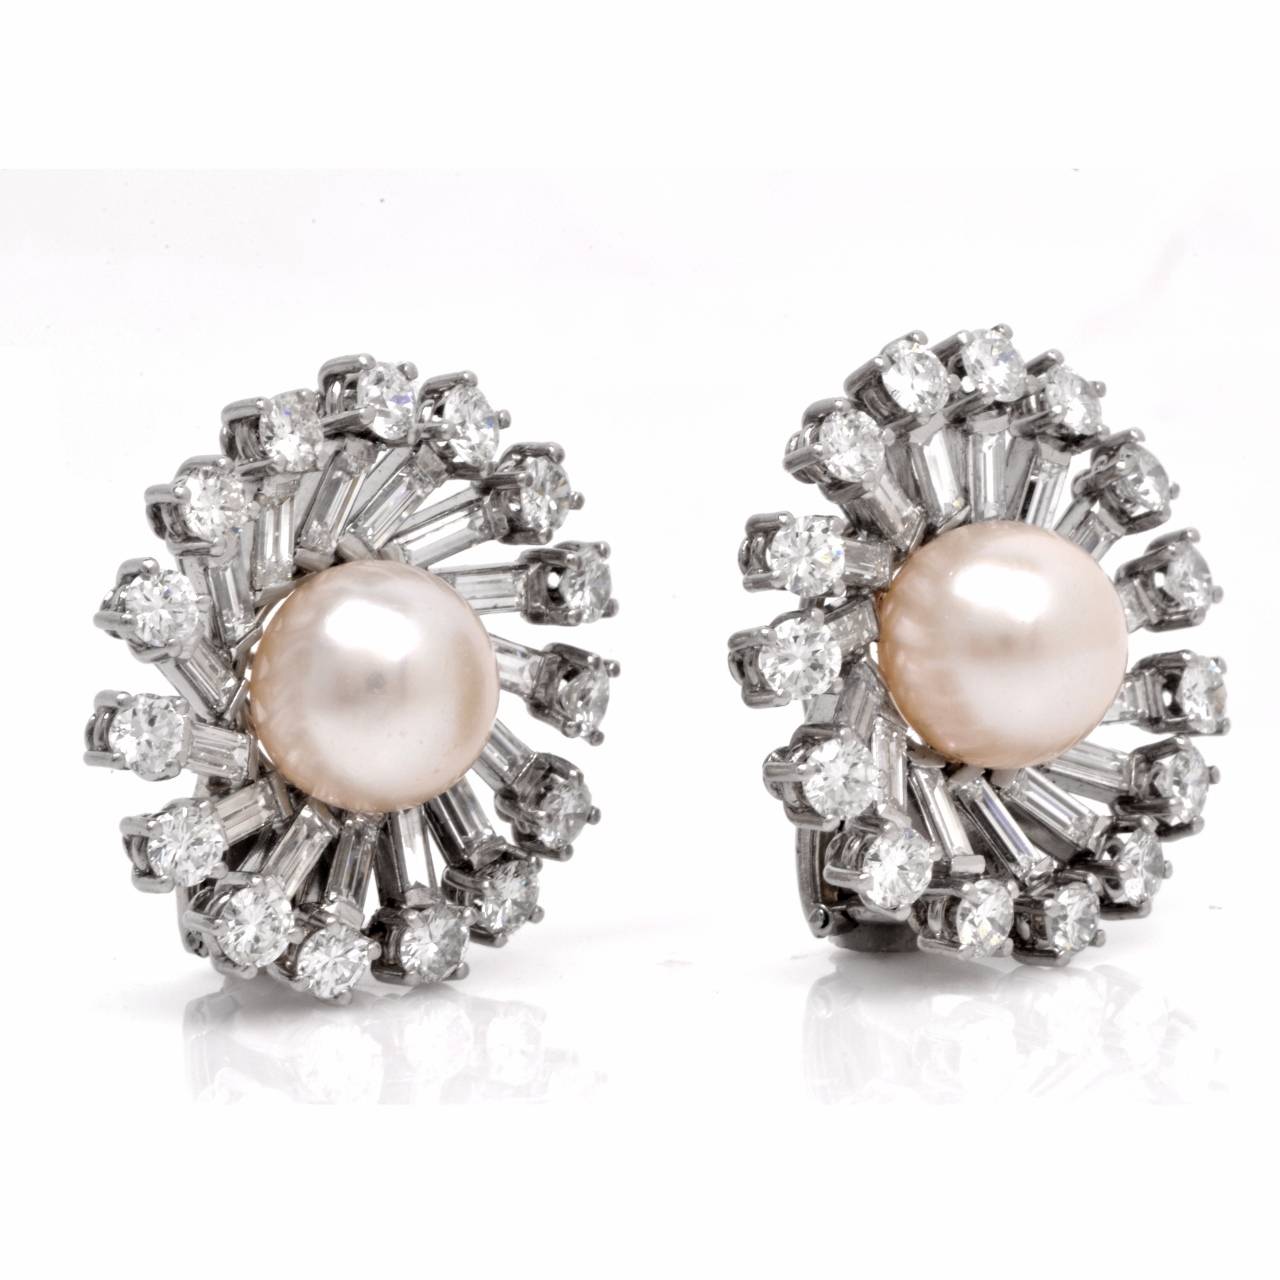 Captivating and  timelessly elegant in style, these eye-catching vintage ear adornments are crafted in platinum, weigh 23.2 grams and measure  25 mm in diameter.  These luxurious earrings depict a pair of lustrous, white  cultured pearls measuring 9